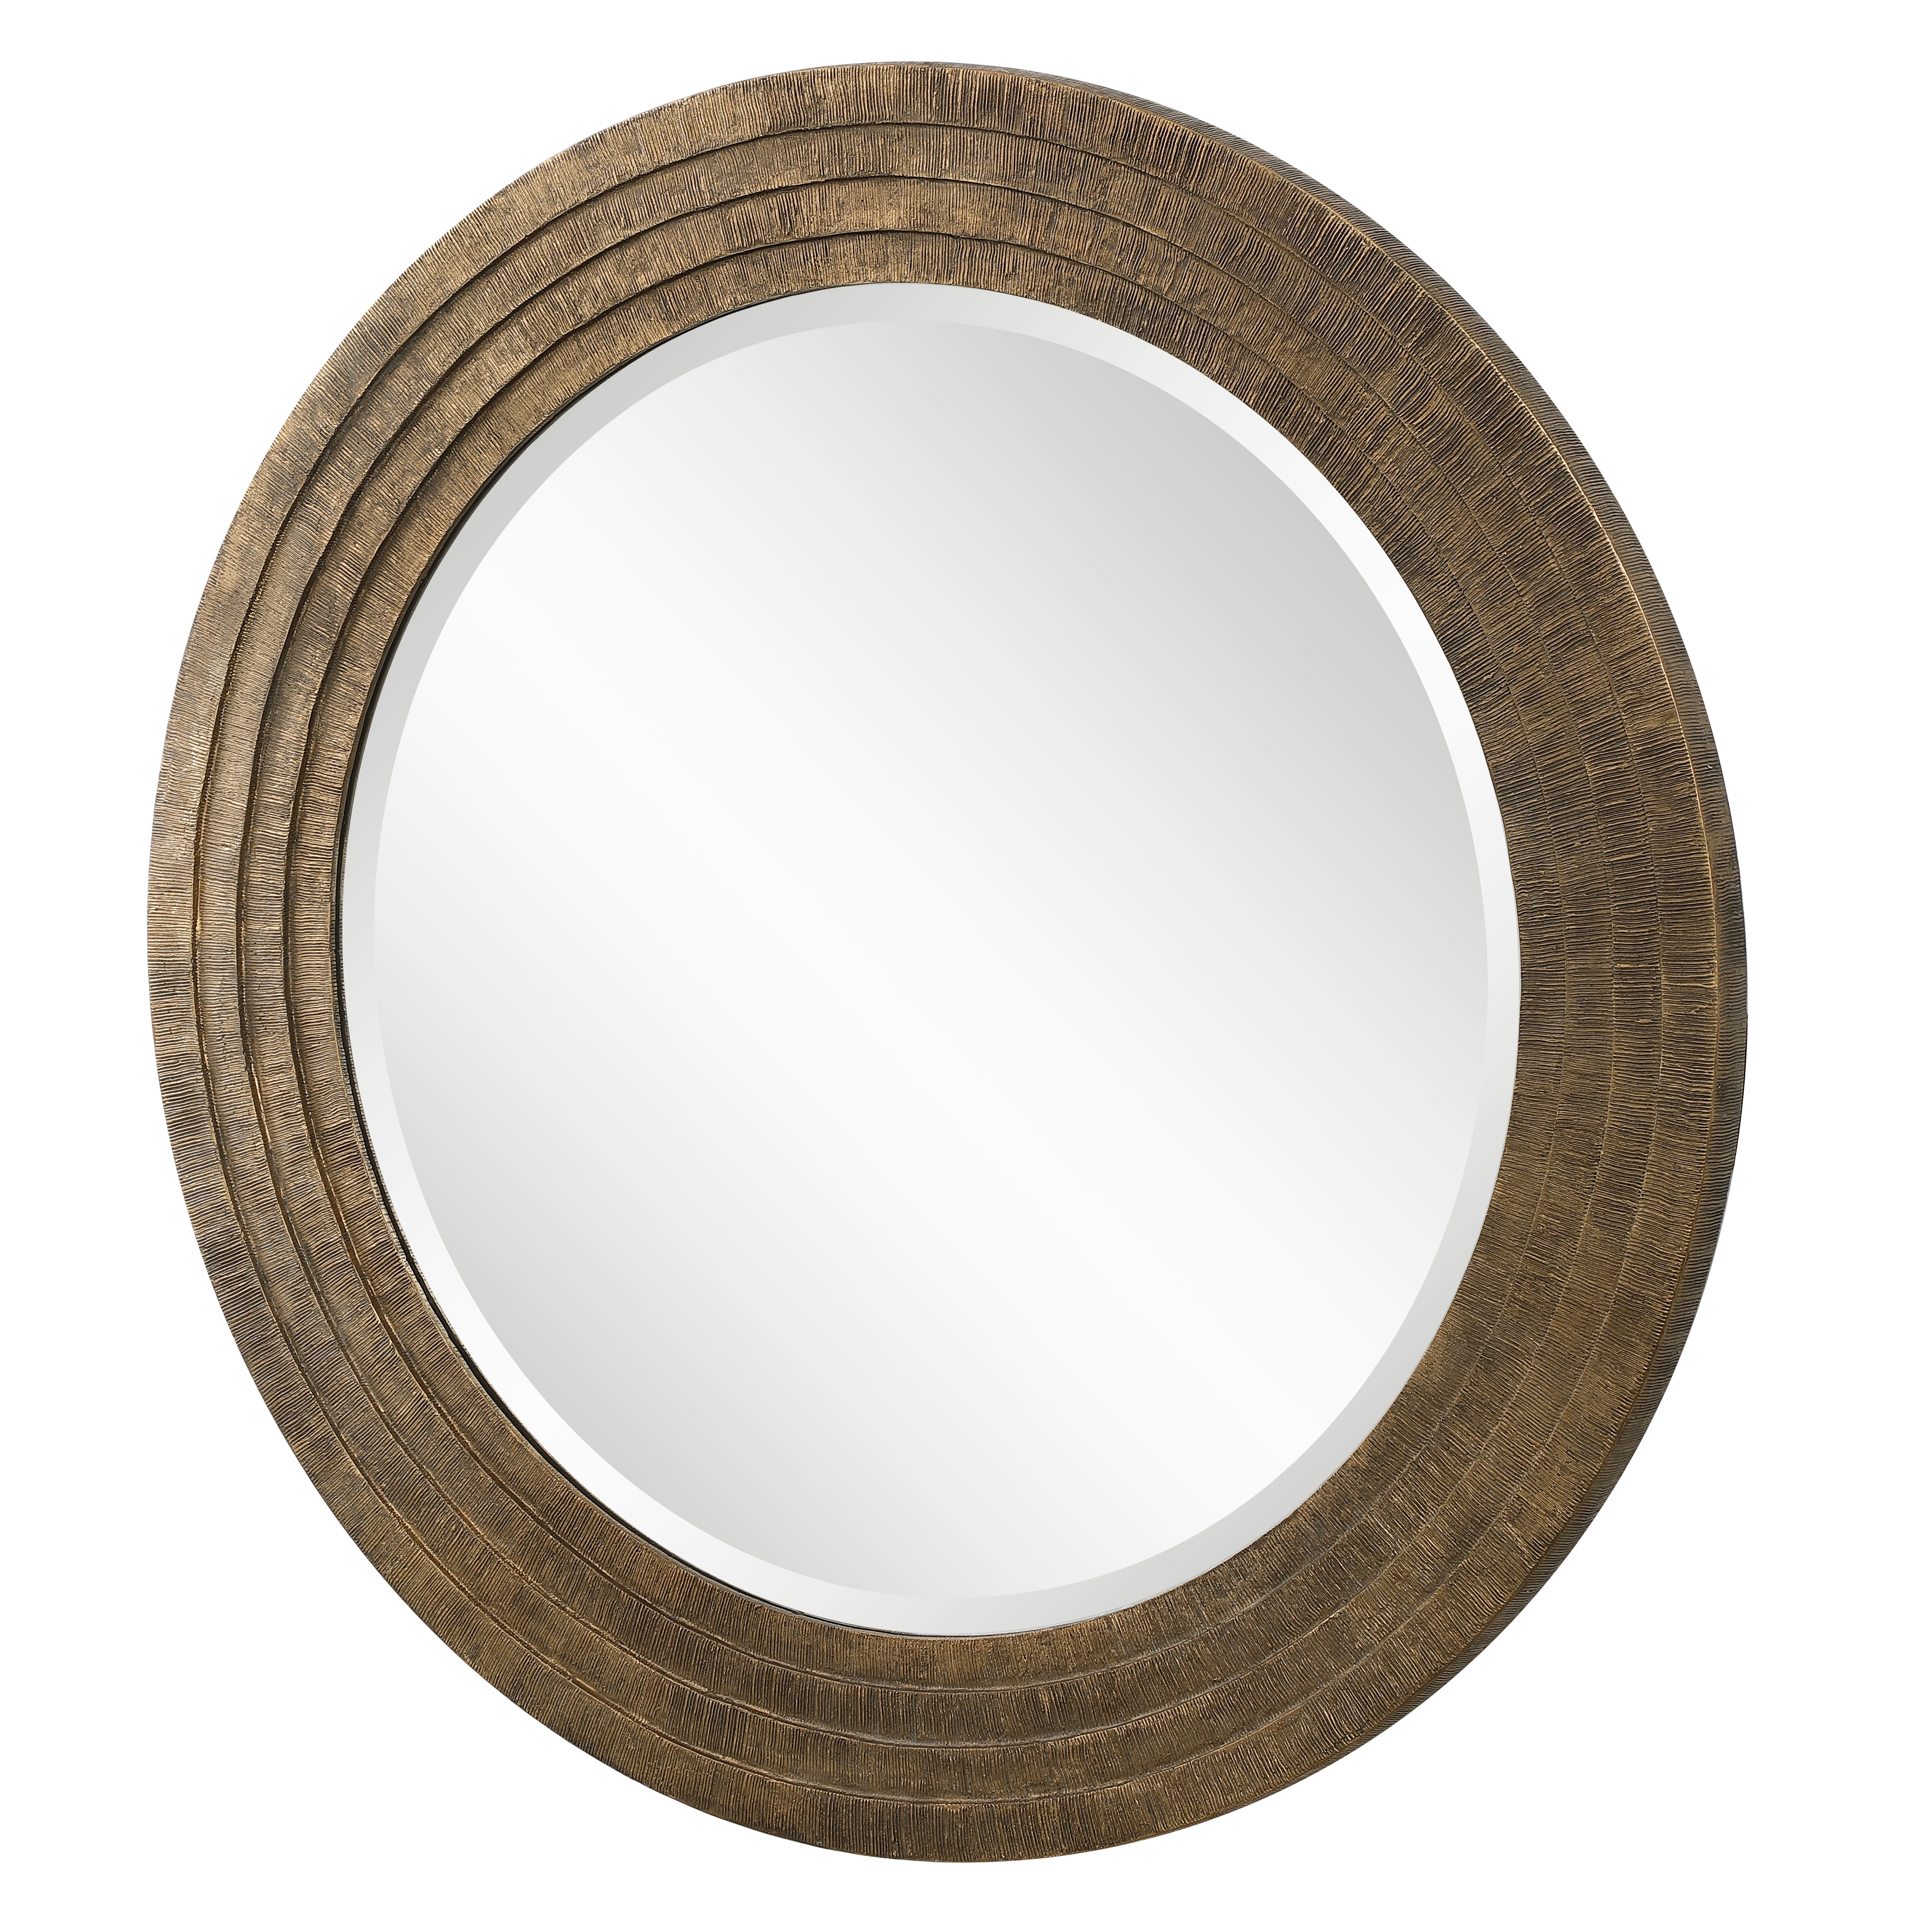 Relic Round Mirror, Aged Gold, 36" - Image 3